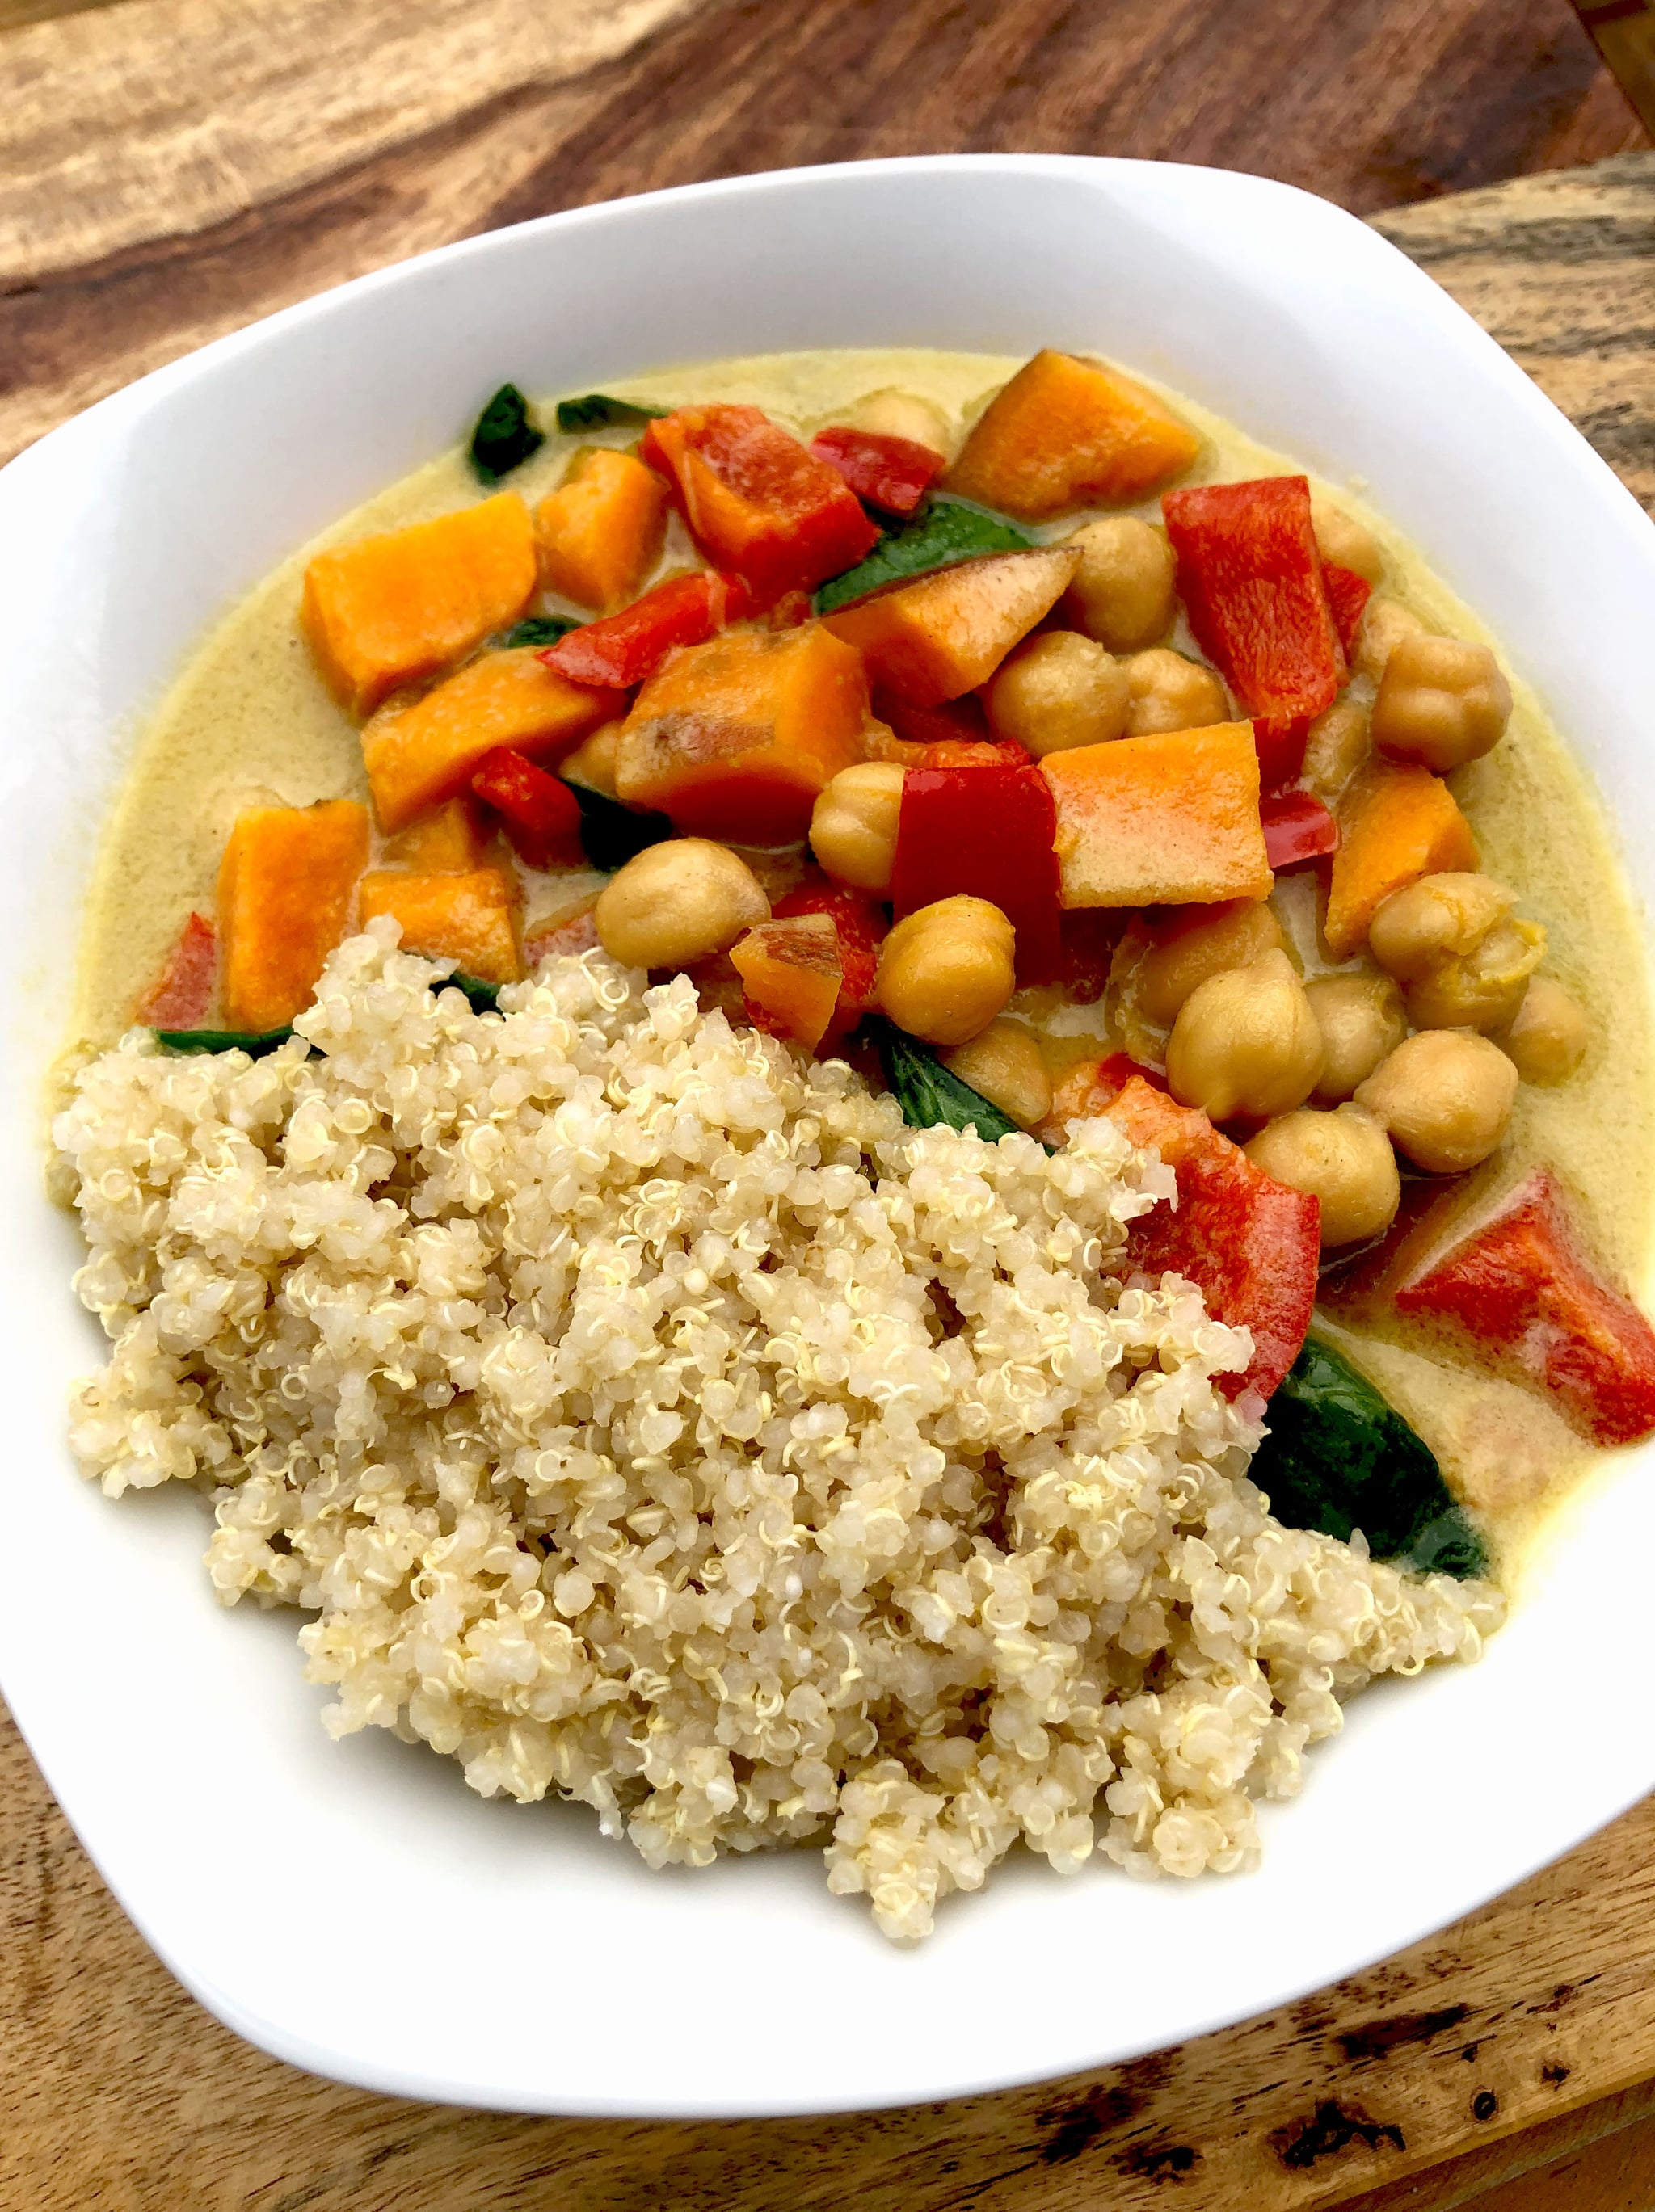 What I Ate on an HCLF Vegan Diet